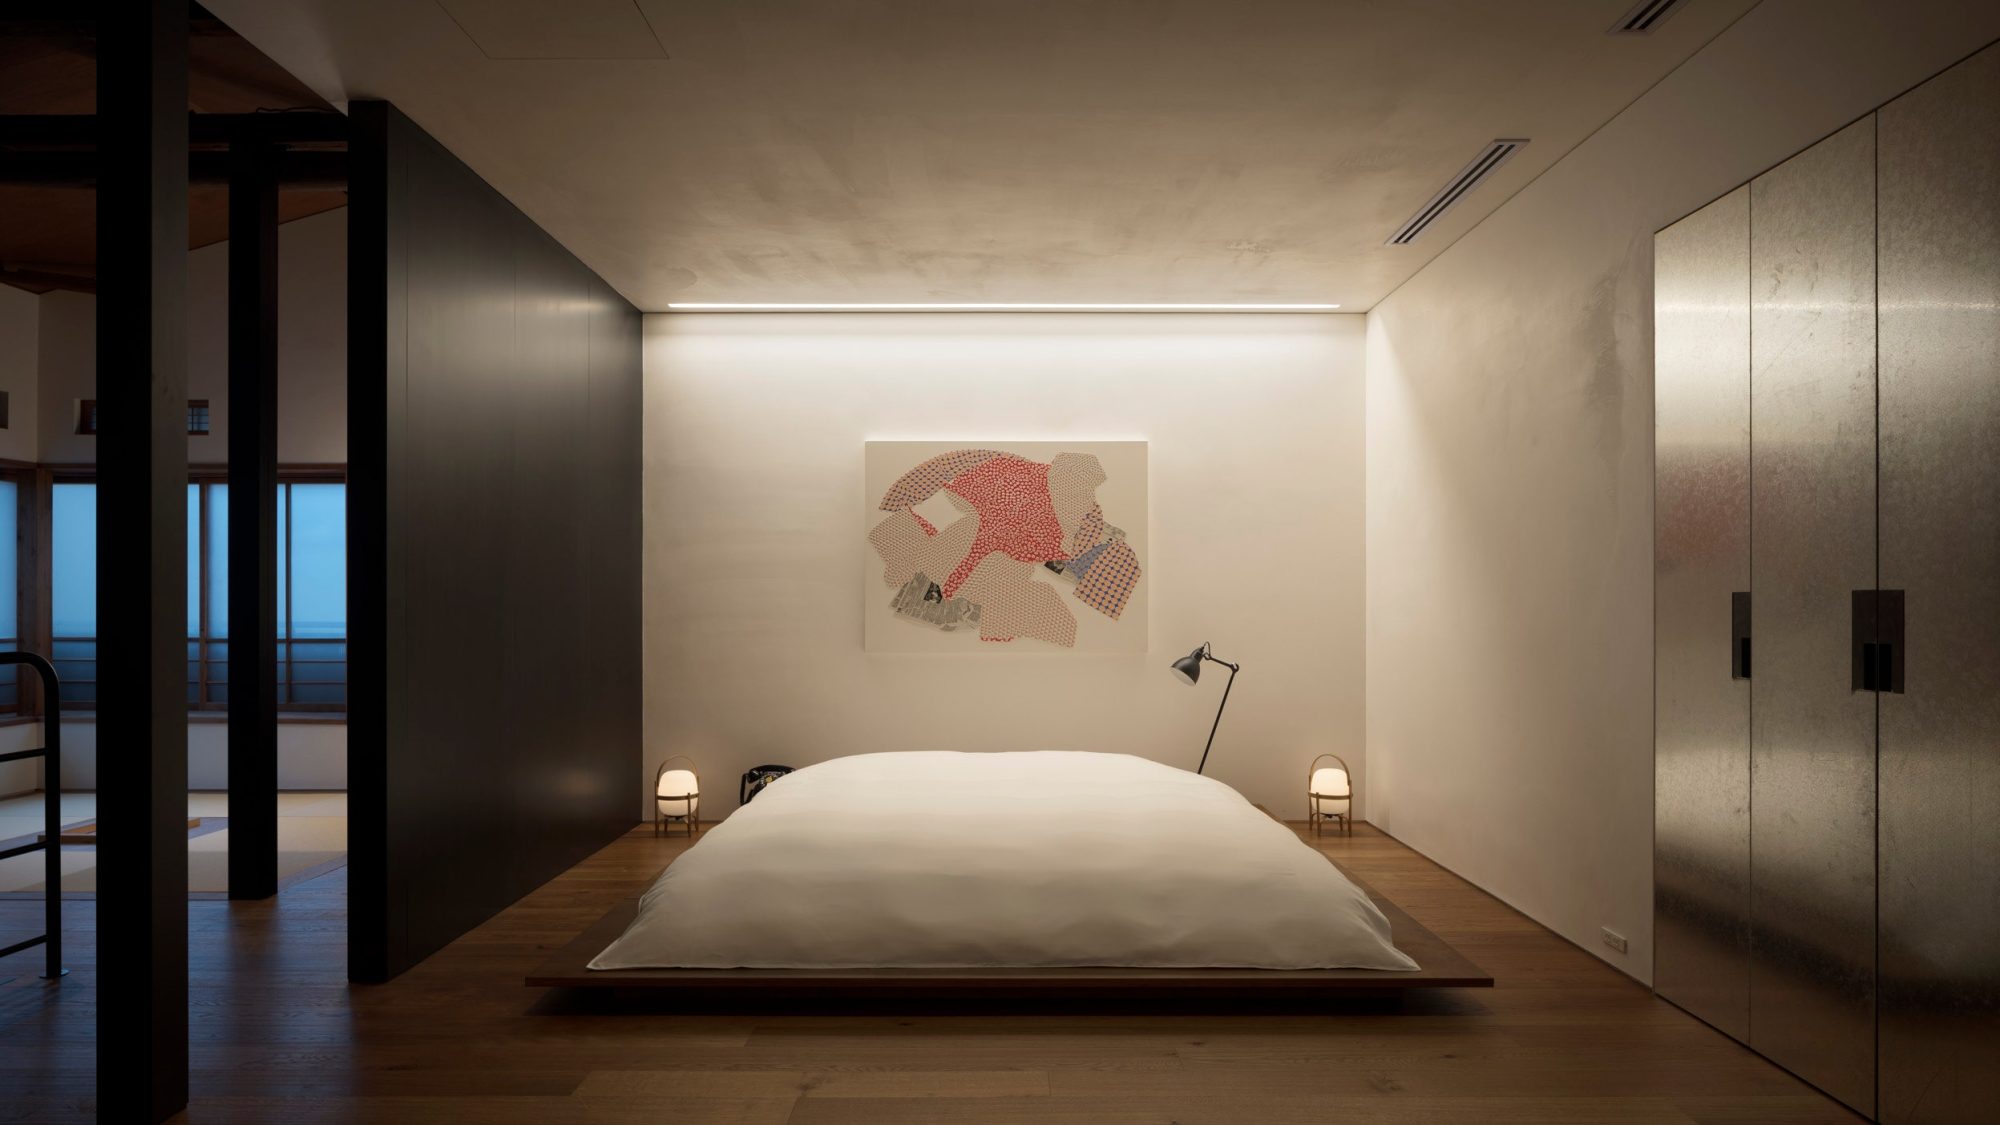 Trunk (House) Tokyo:  A boutique hotel that feels more like a private home